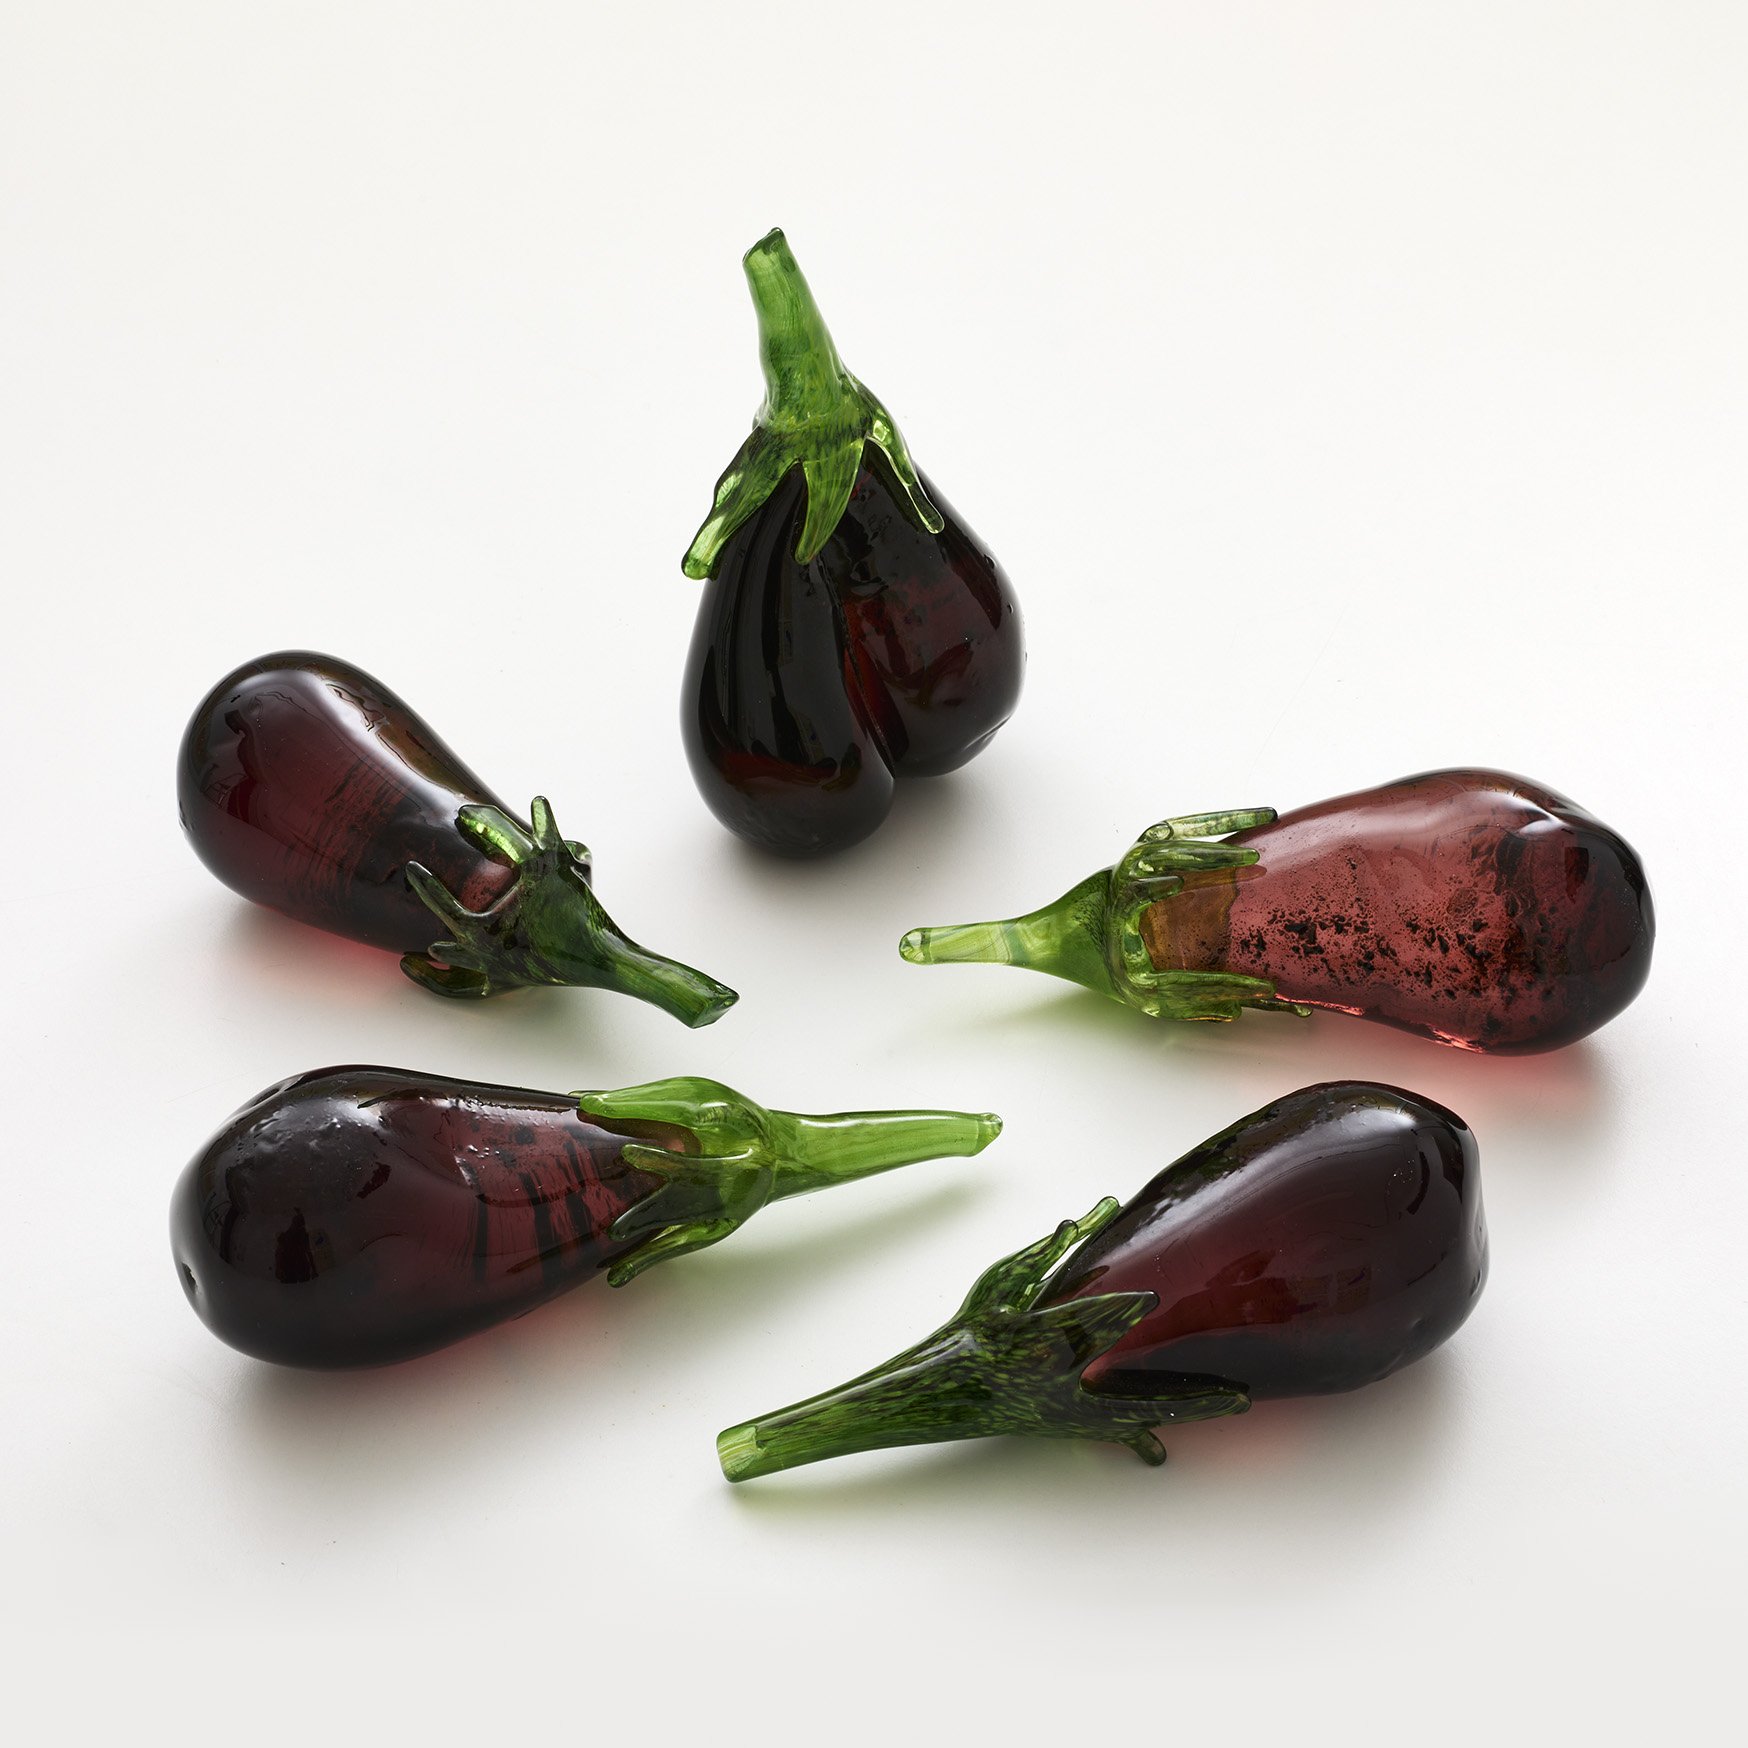   Les aubergines , 2023  Solid hot-sculpted glass  15 x 6 x 5 cm · 6 x 2.3 x 2 in  Edition of 5 